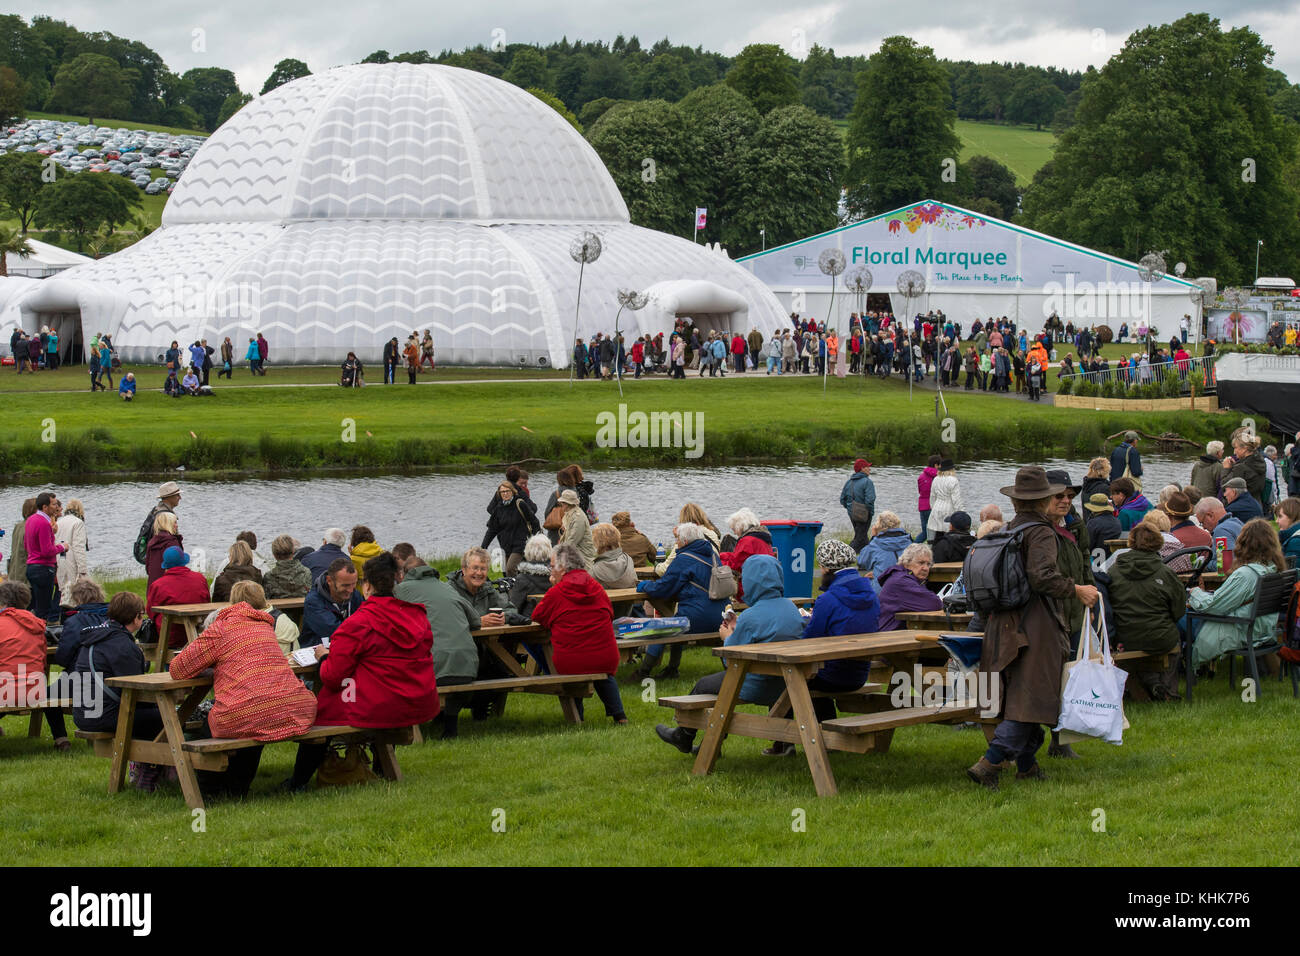 Large crowd at RHS Chatsworth Flower Show - sitting at picnic tables, & going into large white marquees - Chatsworth House, Derbyshire, England, UK. Stock Photo